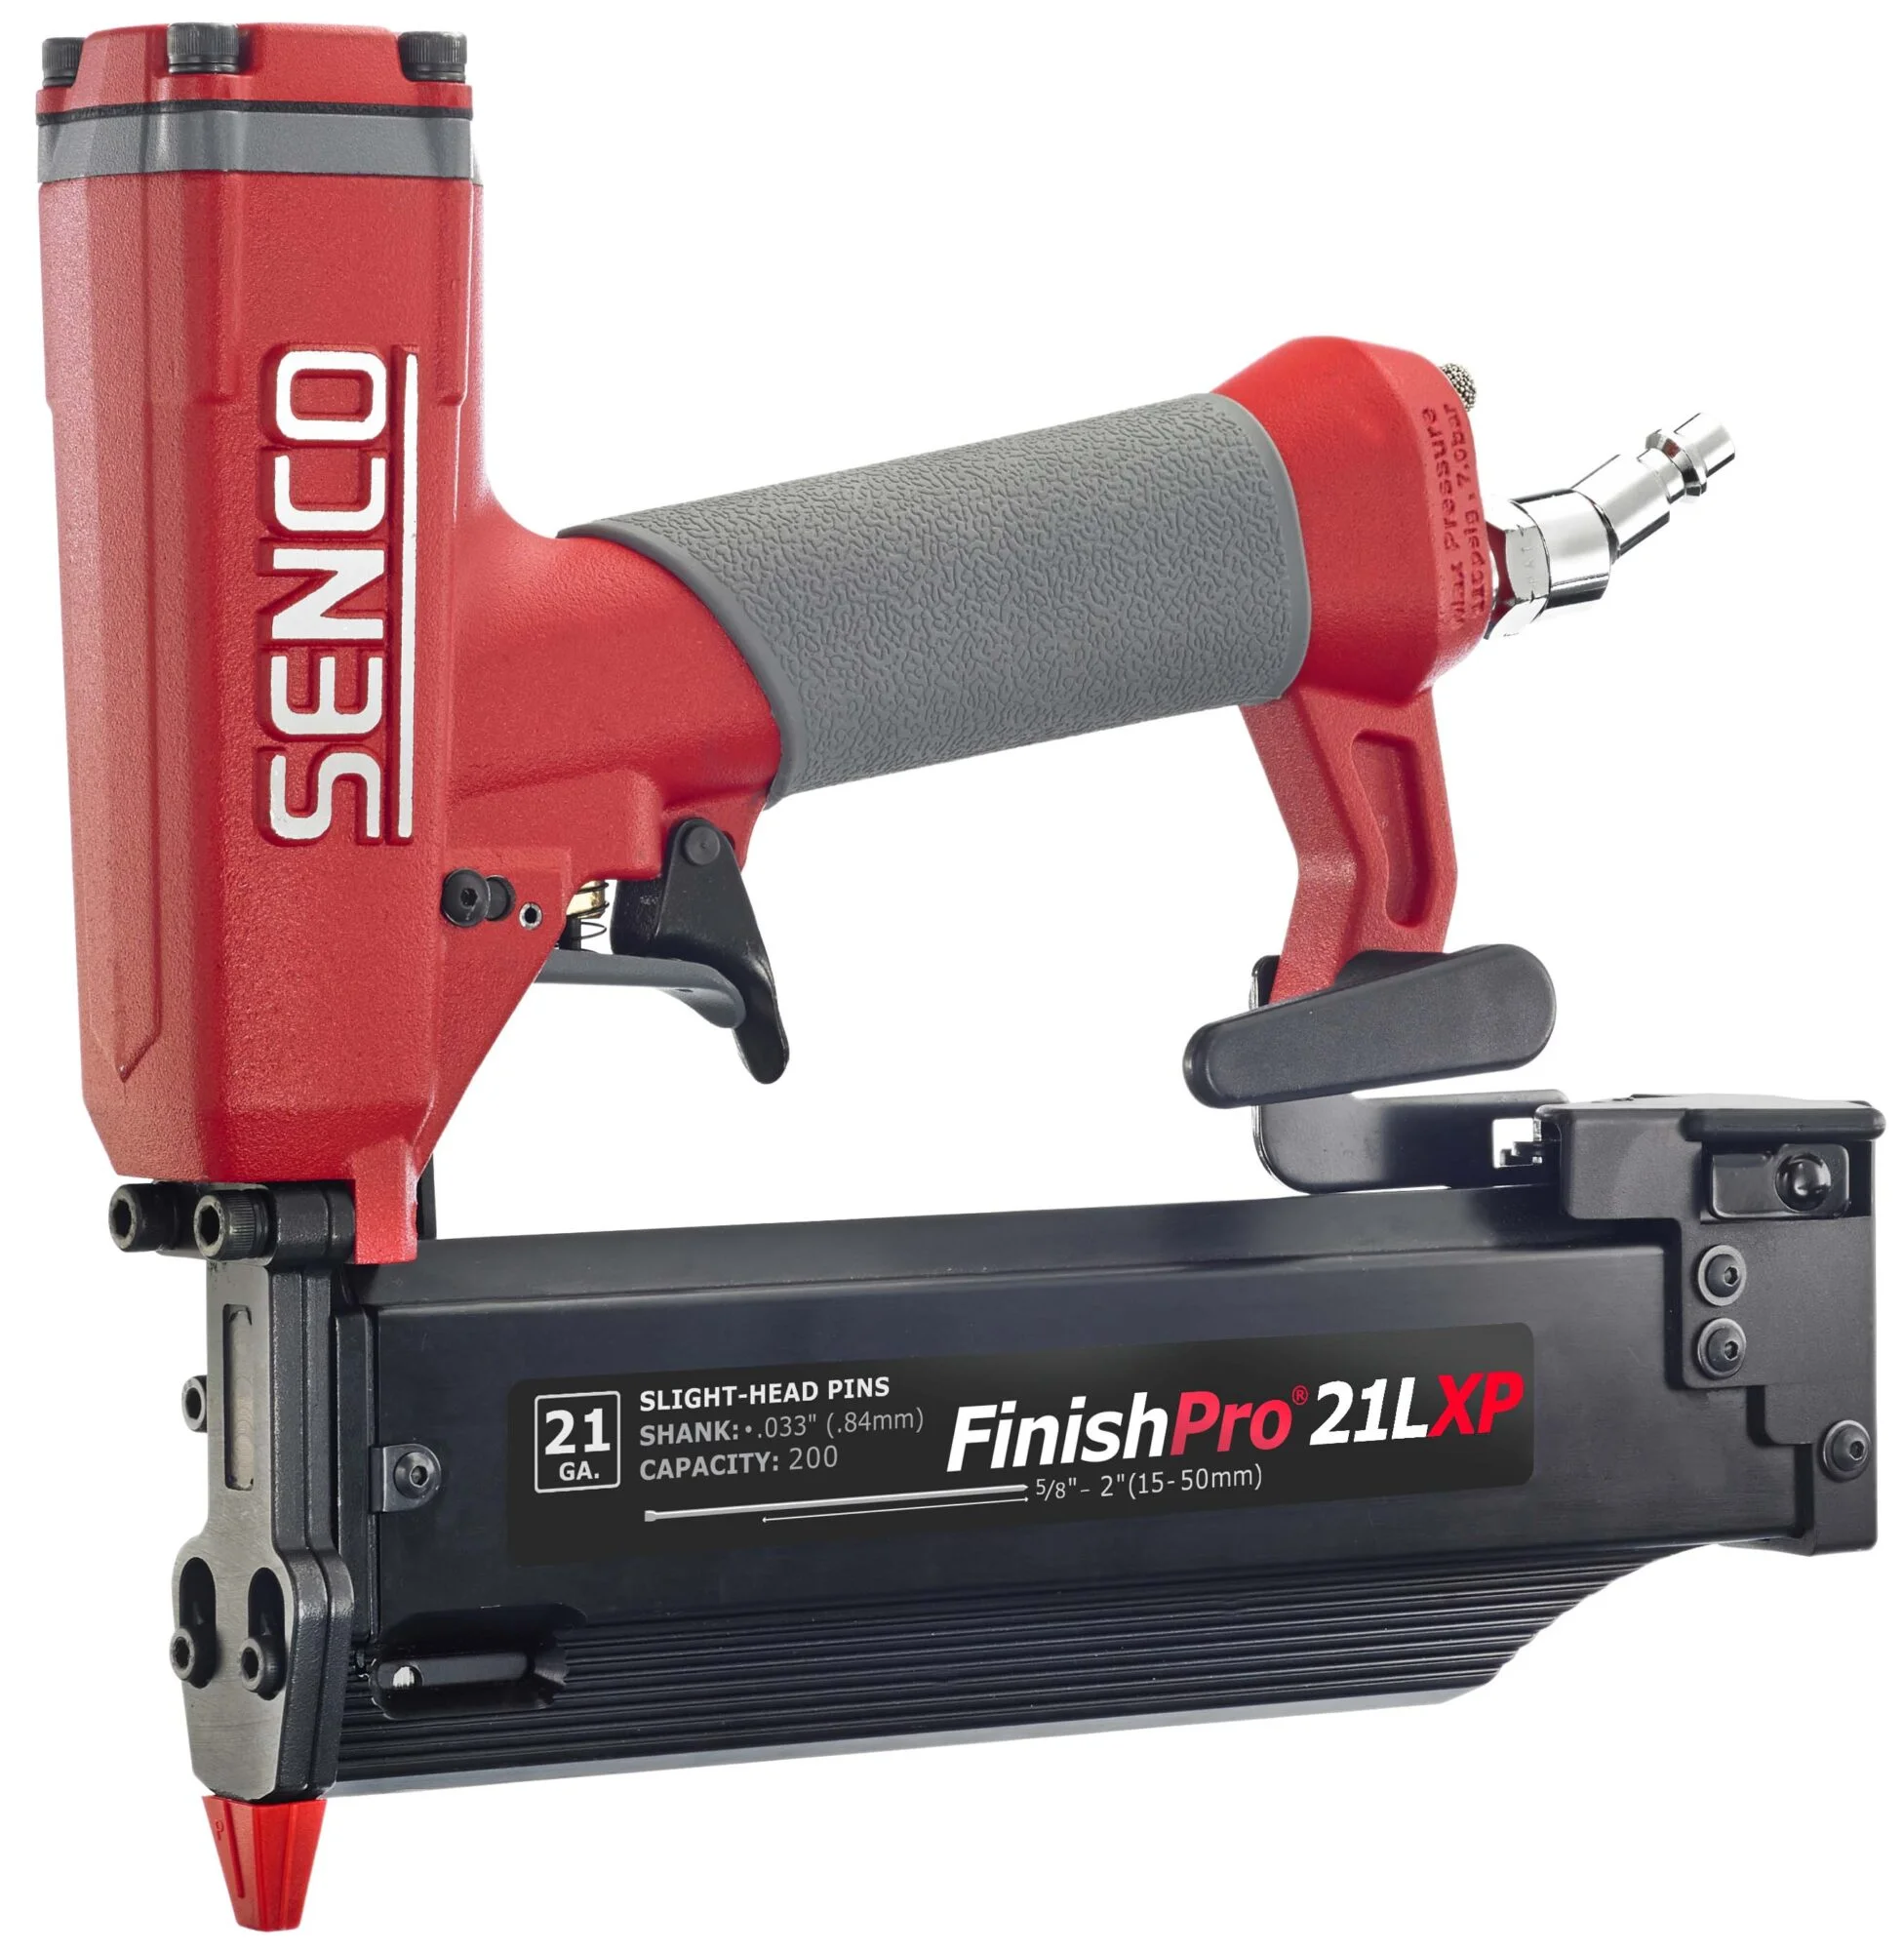 Senco’s New FinishPro® 21 LXP Delivers the Best of Both